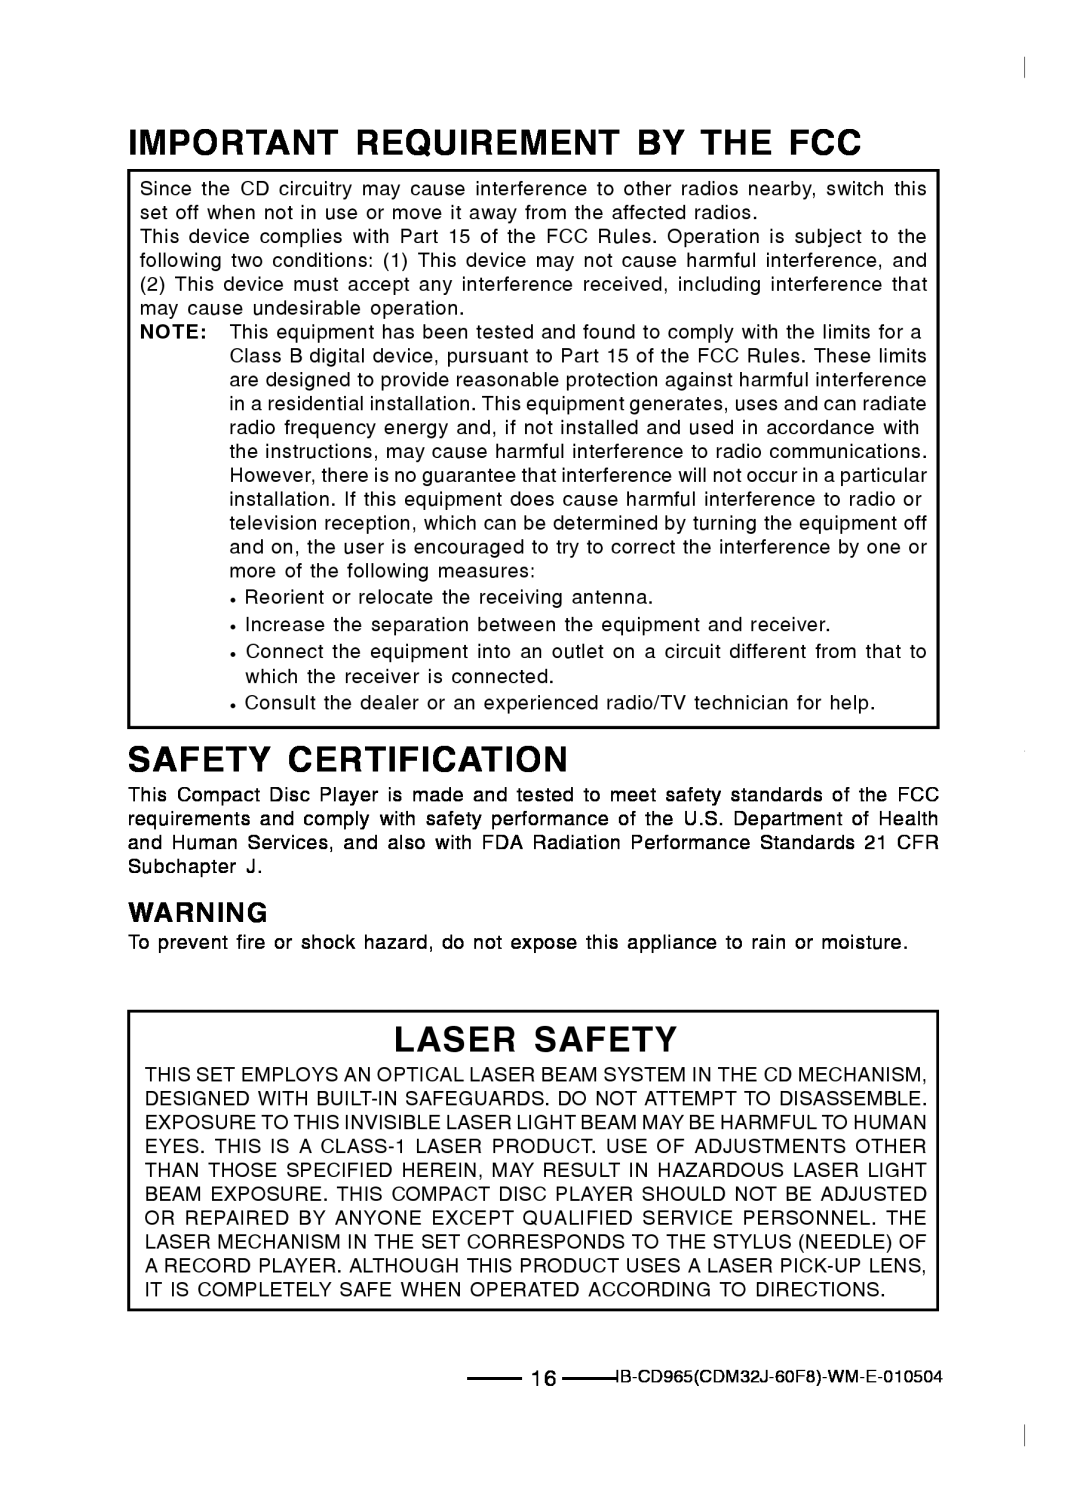 Lenoxx Electronics CD-965 operating instructions Important Requirement By The Fcc, Safety Certification, Laser Safety 